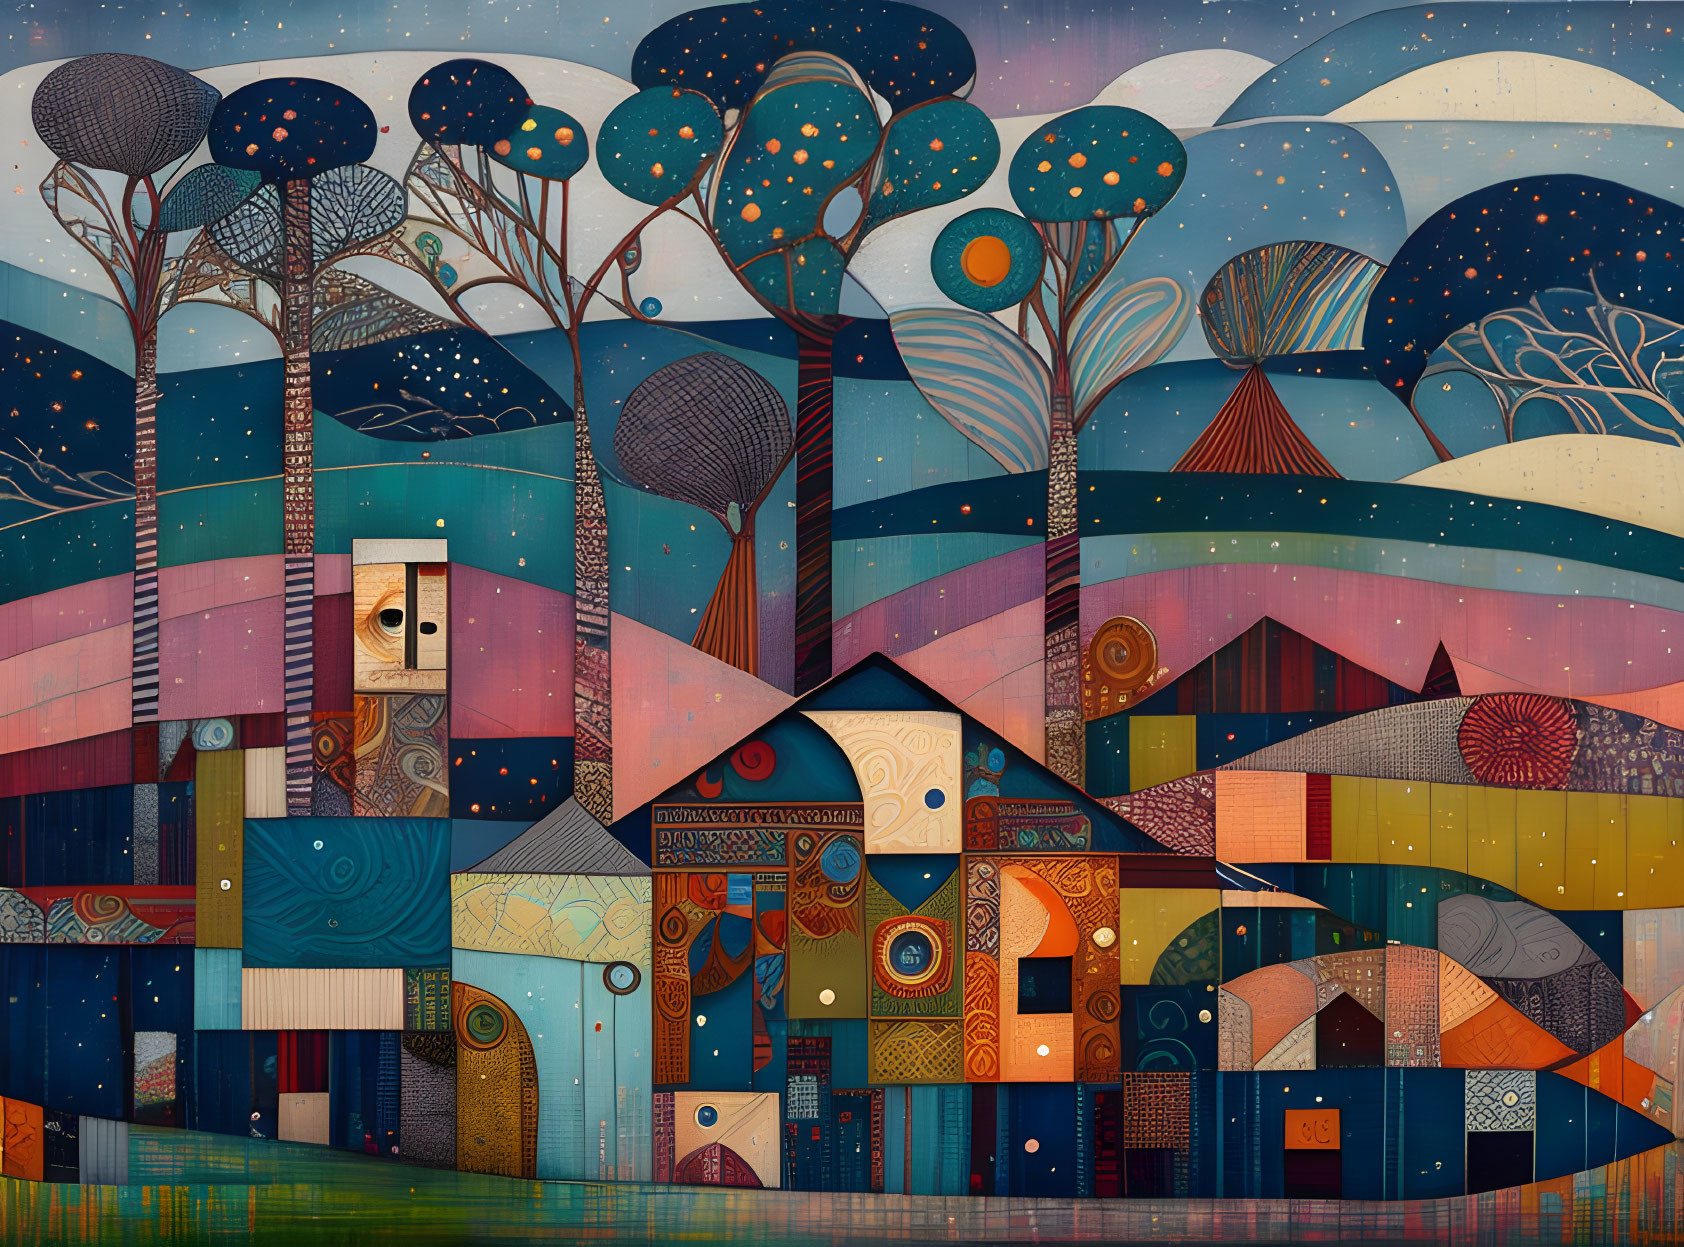 Colorful stylized artwork: Whimsical houses, patterned trees, starry night sky